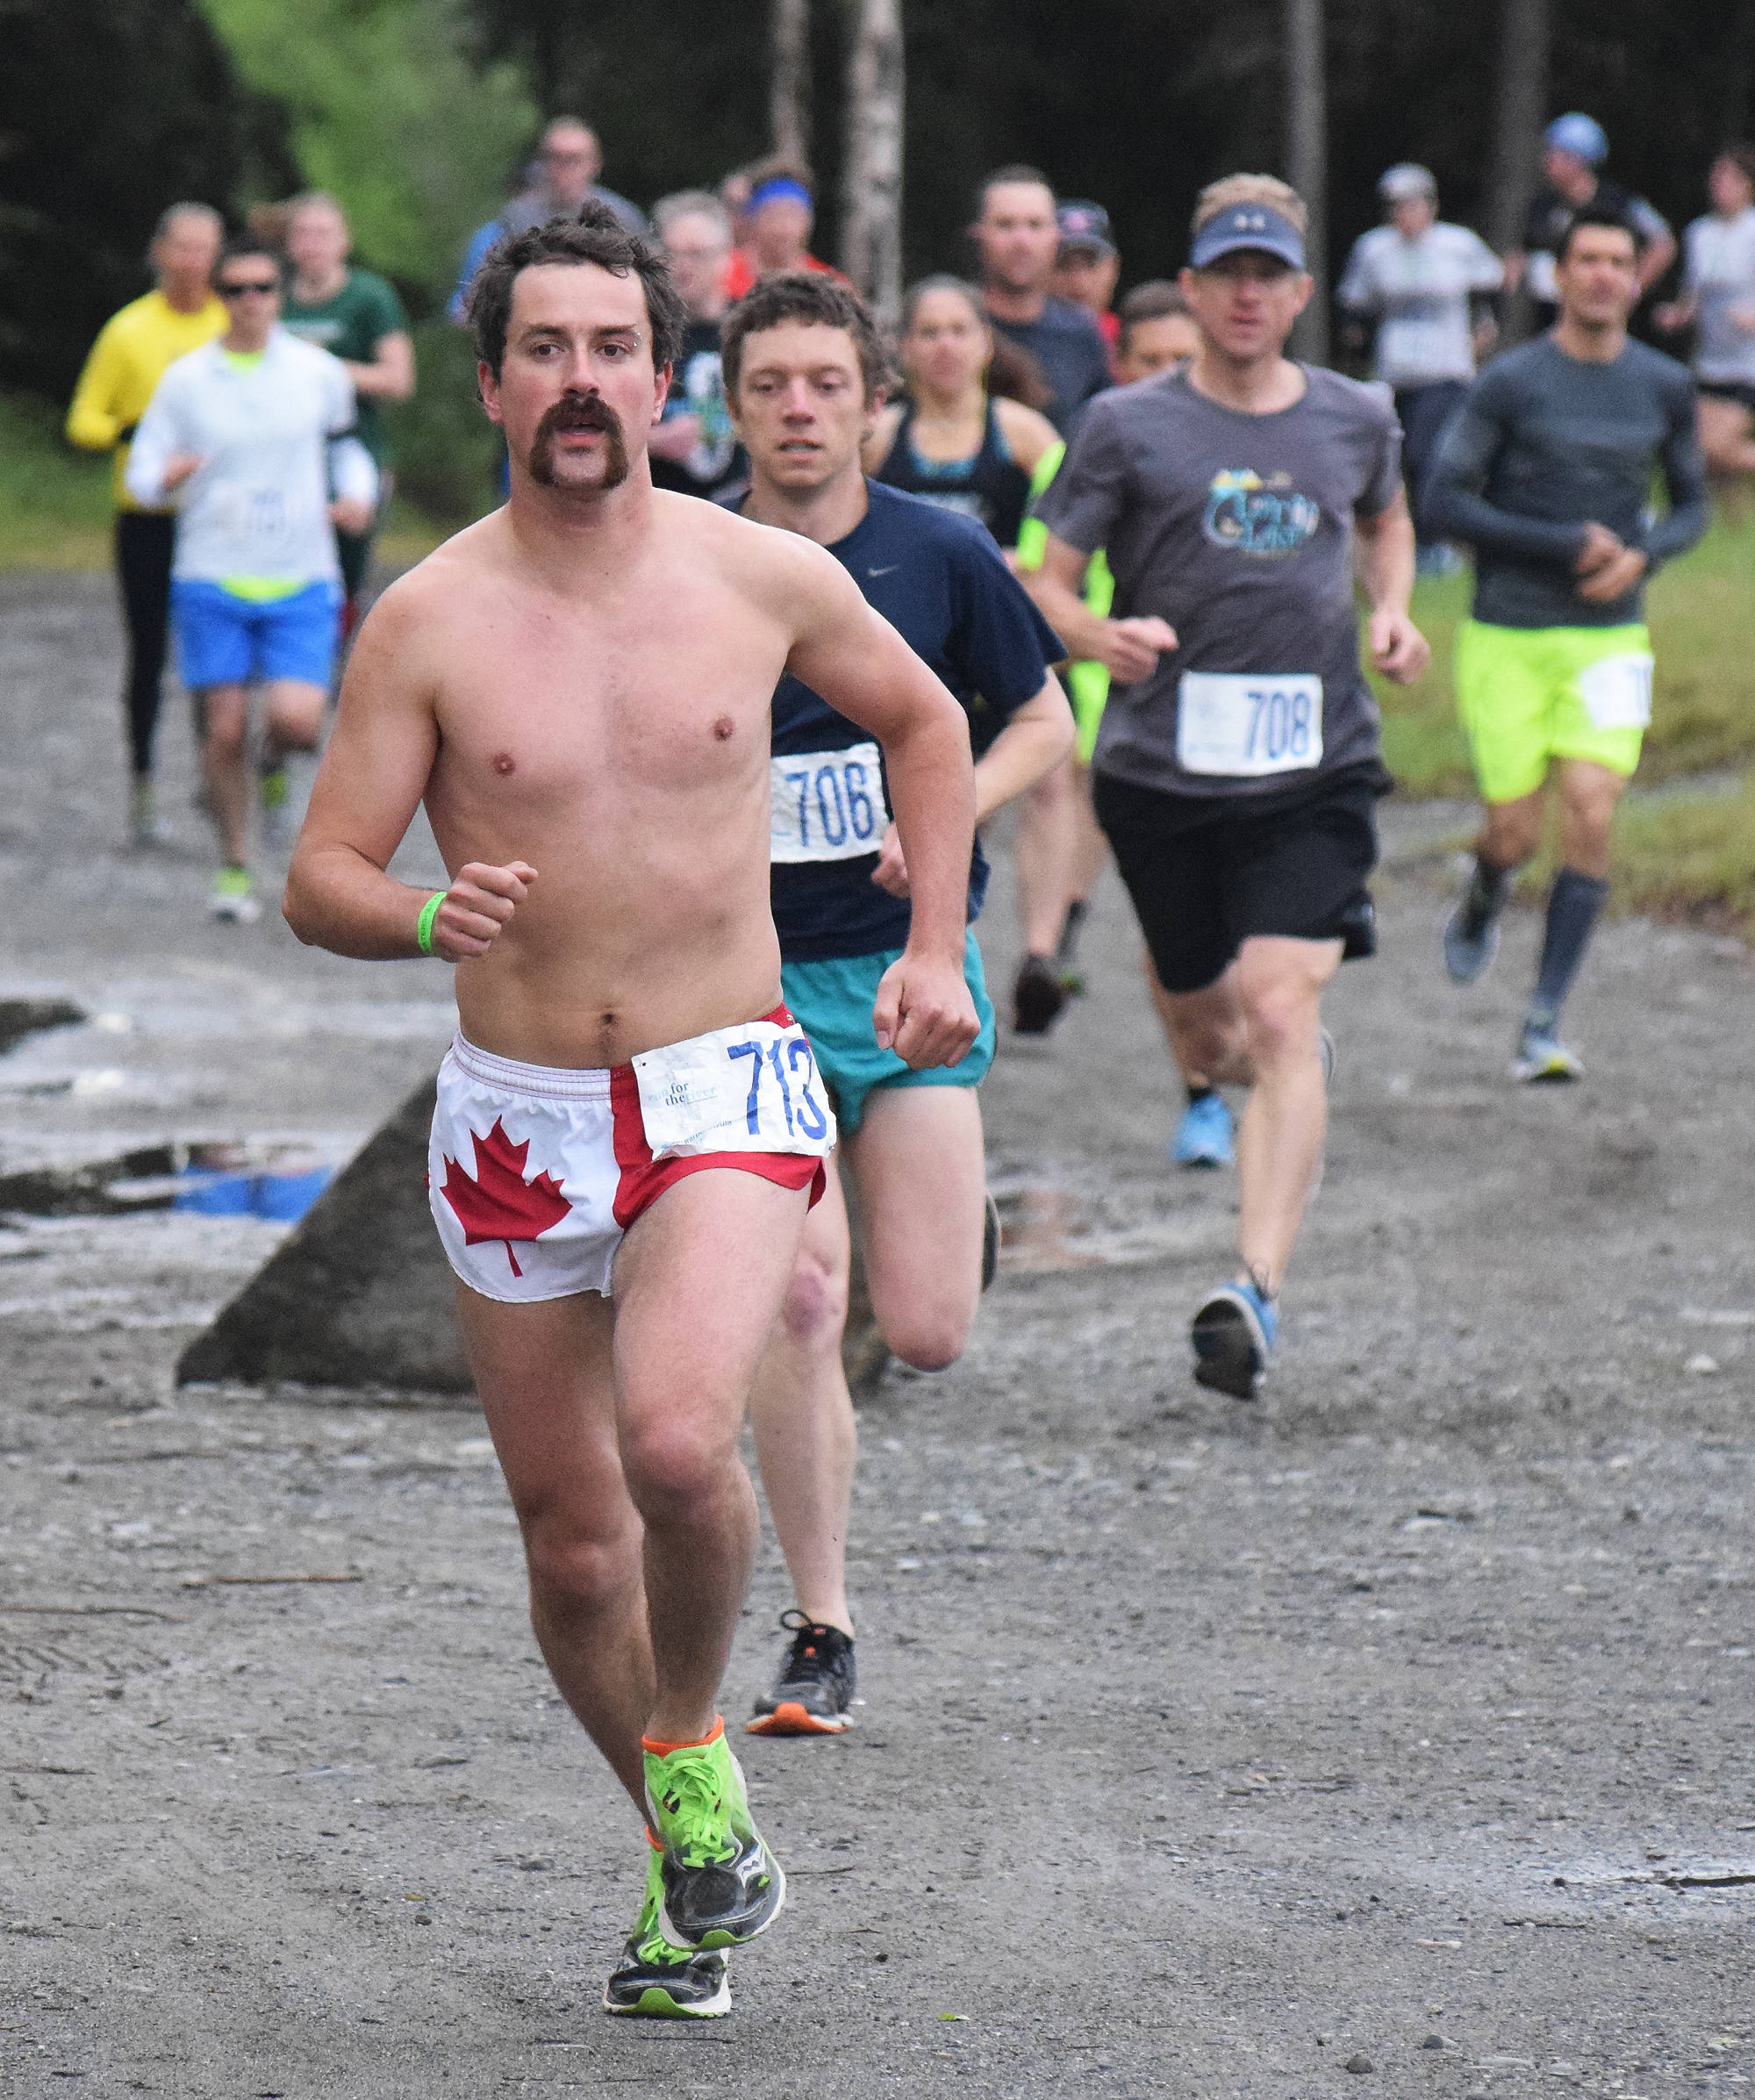 Men’s Run for the River 10-mile winner Matt Adams leads the pack out onto the course Saturday morning in Soldotna. (Photo by Joey Klecka/Peninsula Clarion)